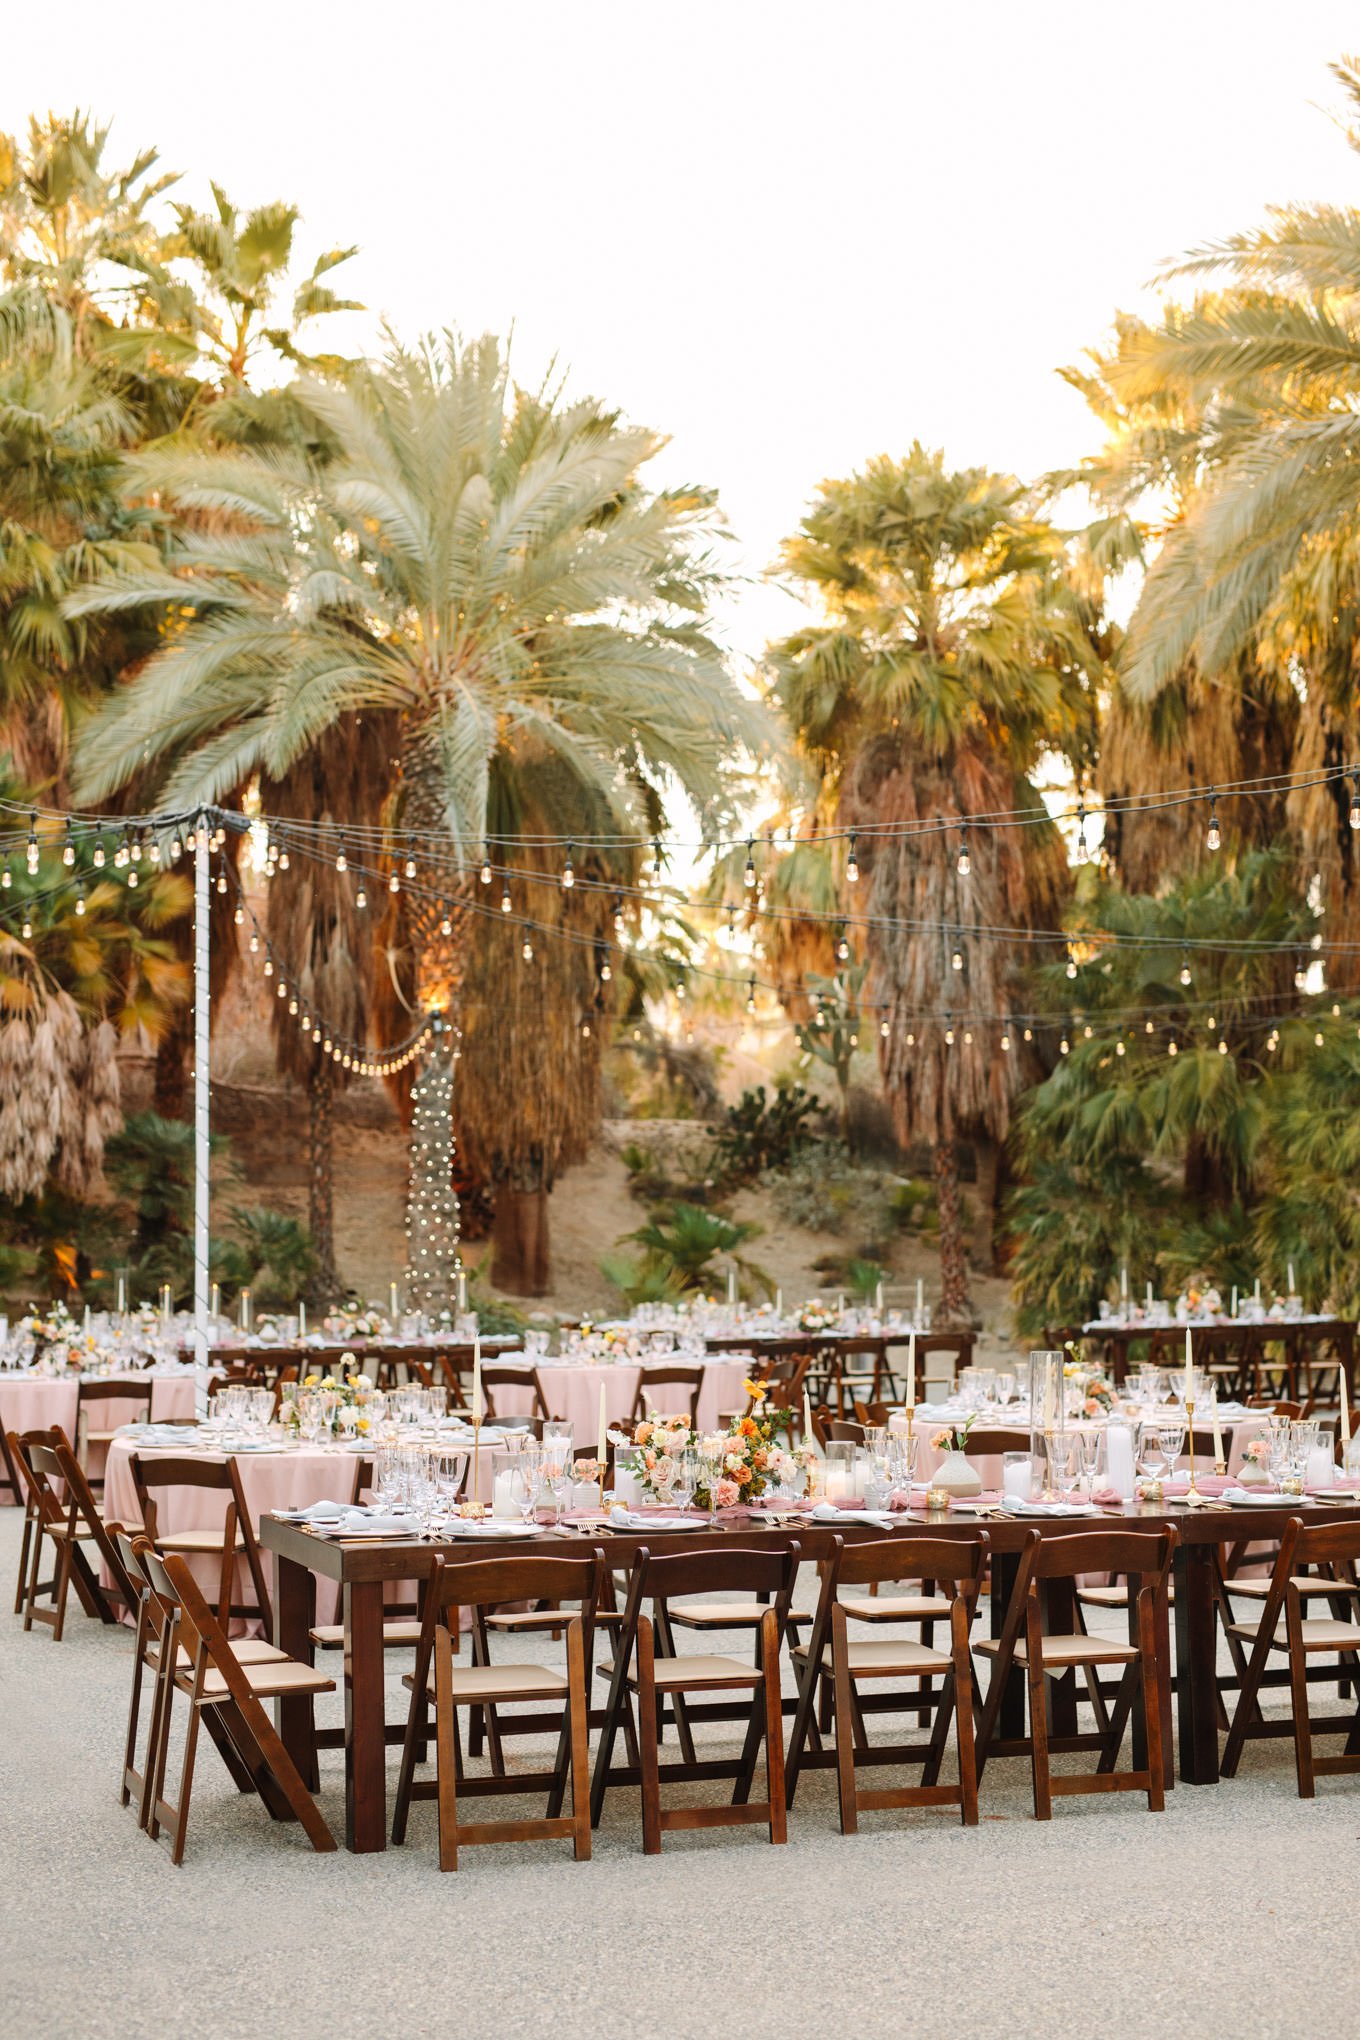 Reception table in palm garden | Living Desert Zoo & Gardens wedding with unique details | Elevated and colorful wedding photography for fun-loving couples in Southern California |  #PalmSprings #palmspringsphotographer #gardenwedding #palmspringswedding  Source: Mary Costa Photography | Los Angeles wedding photographer 